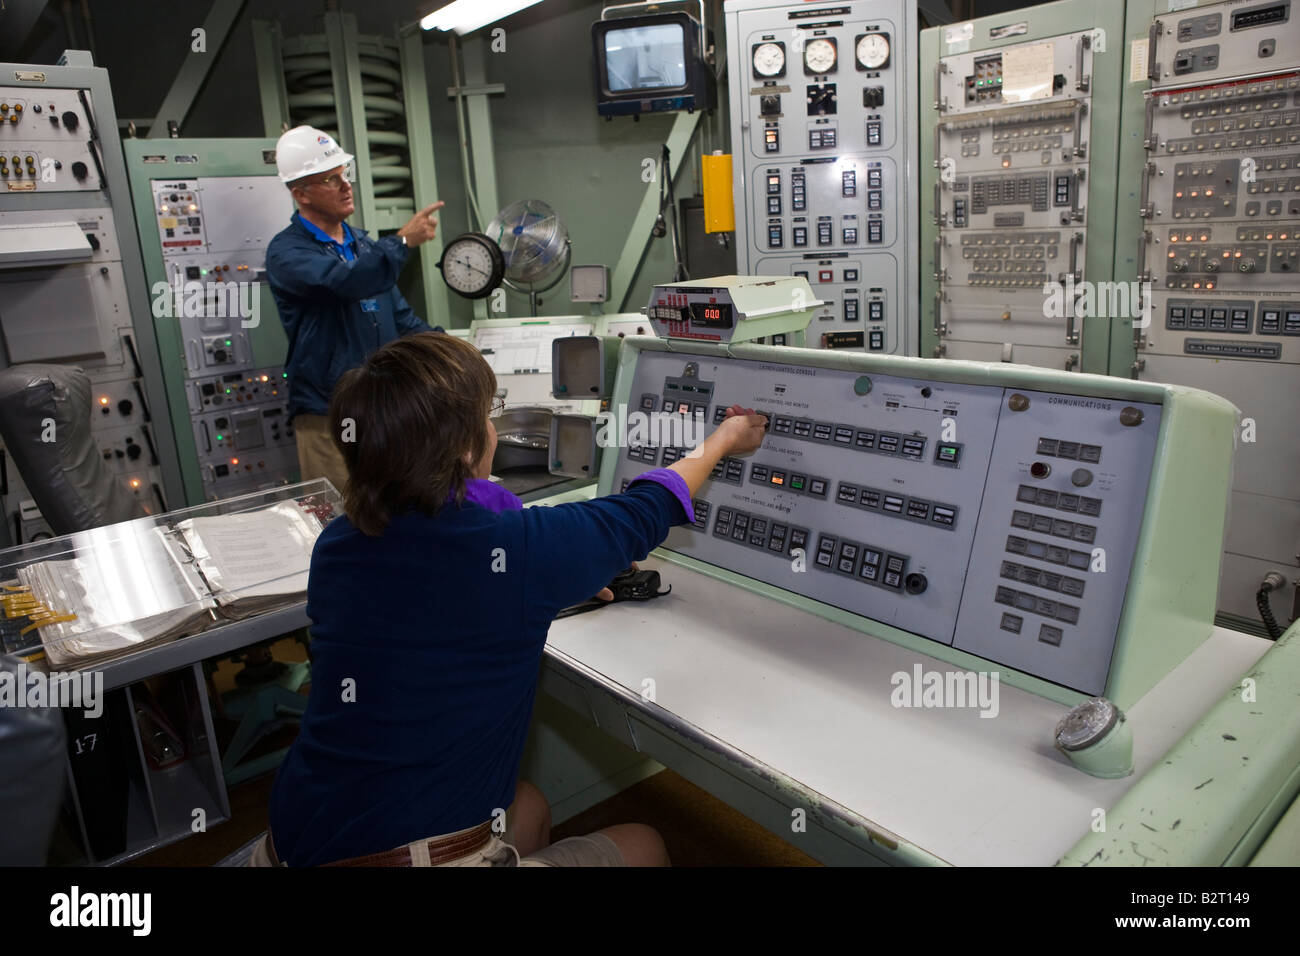 Woman sitting at mission control console and turning launch key. Titan II Missile museum near Tucson Arizona, USA Stock Photo